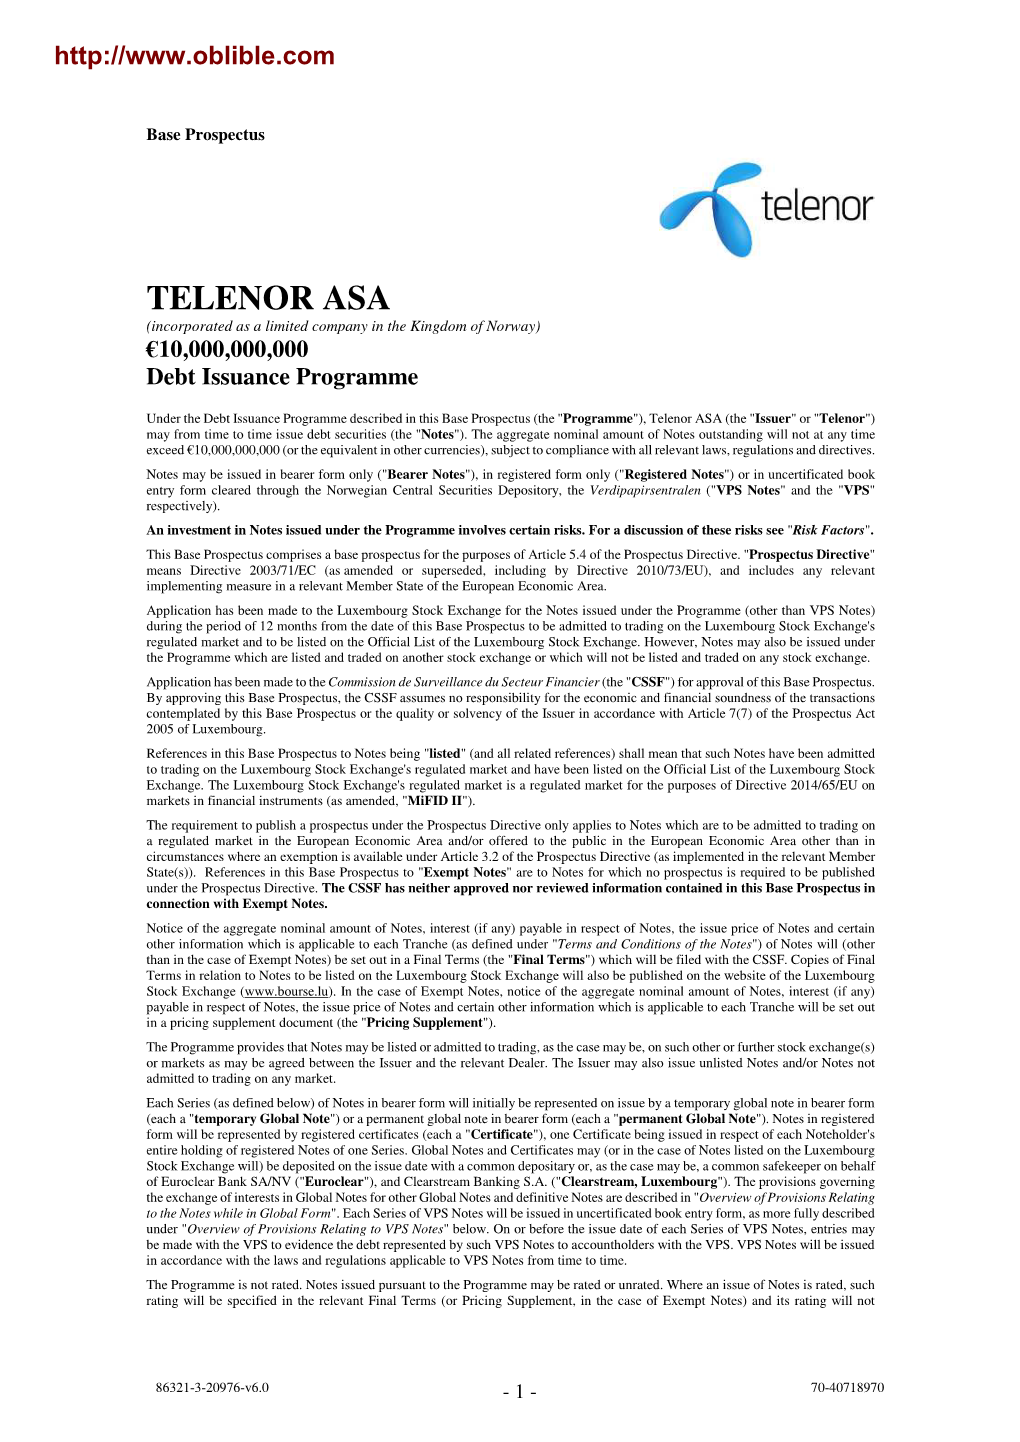 TELENOR ASA (Incorporated As a Limited Company in the Kingdom of Norway) €10,000,000,000 Debt Issuance Programme